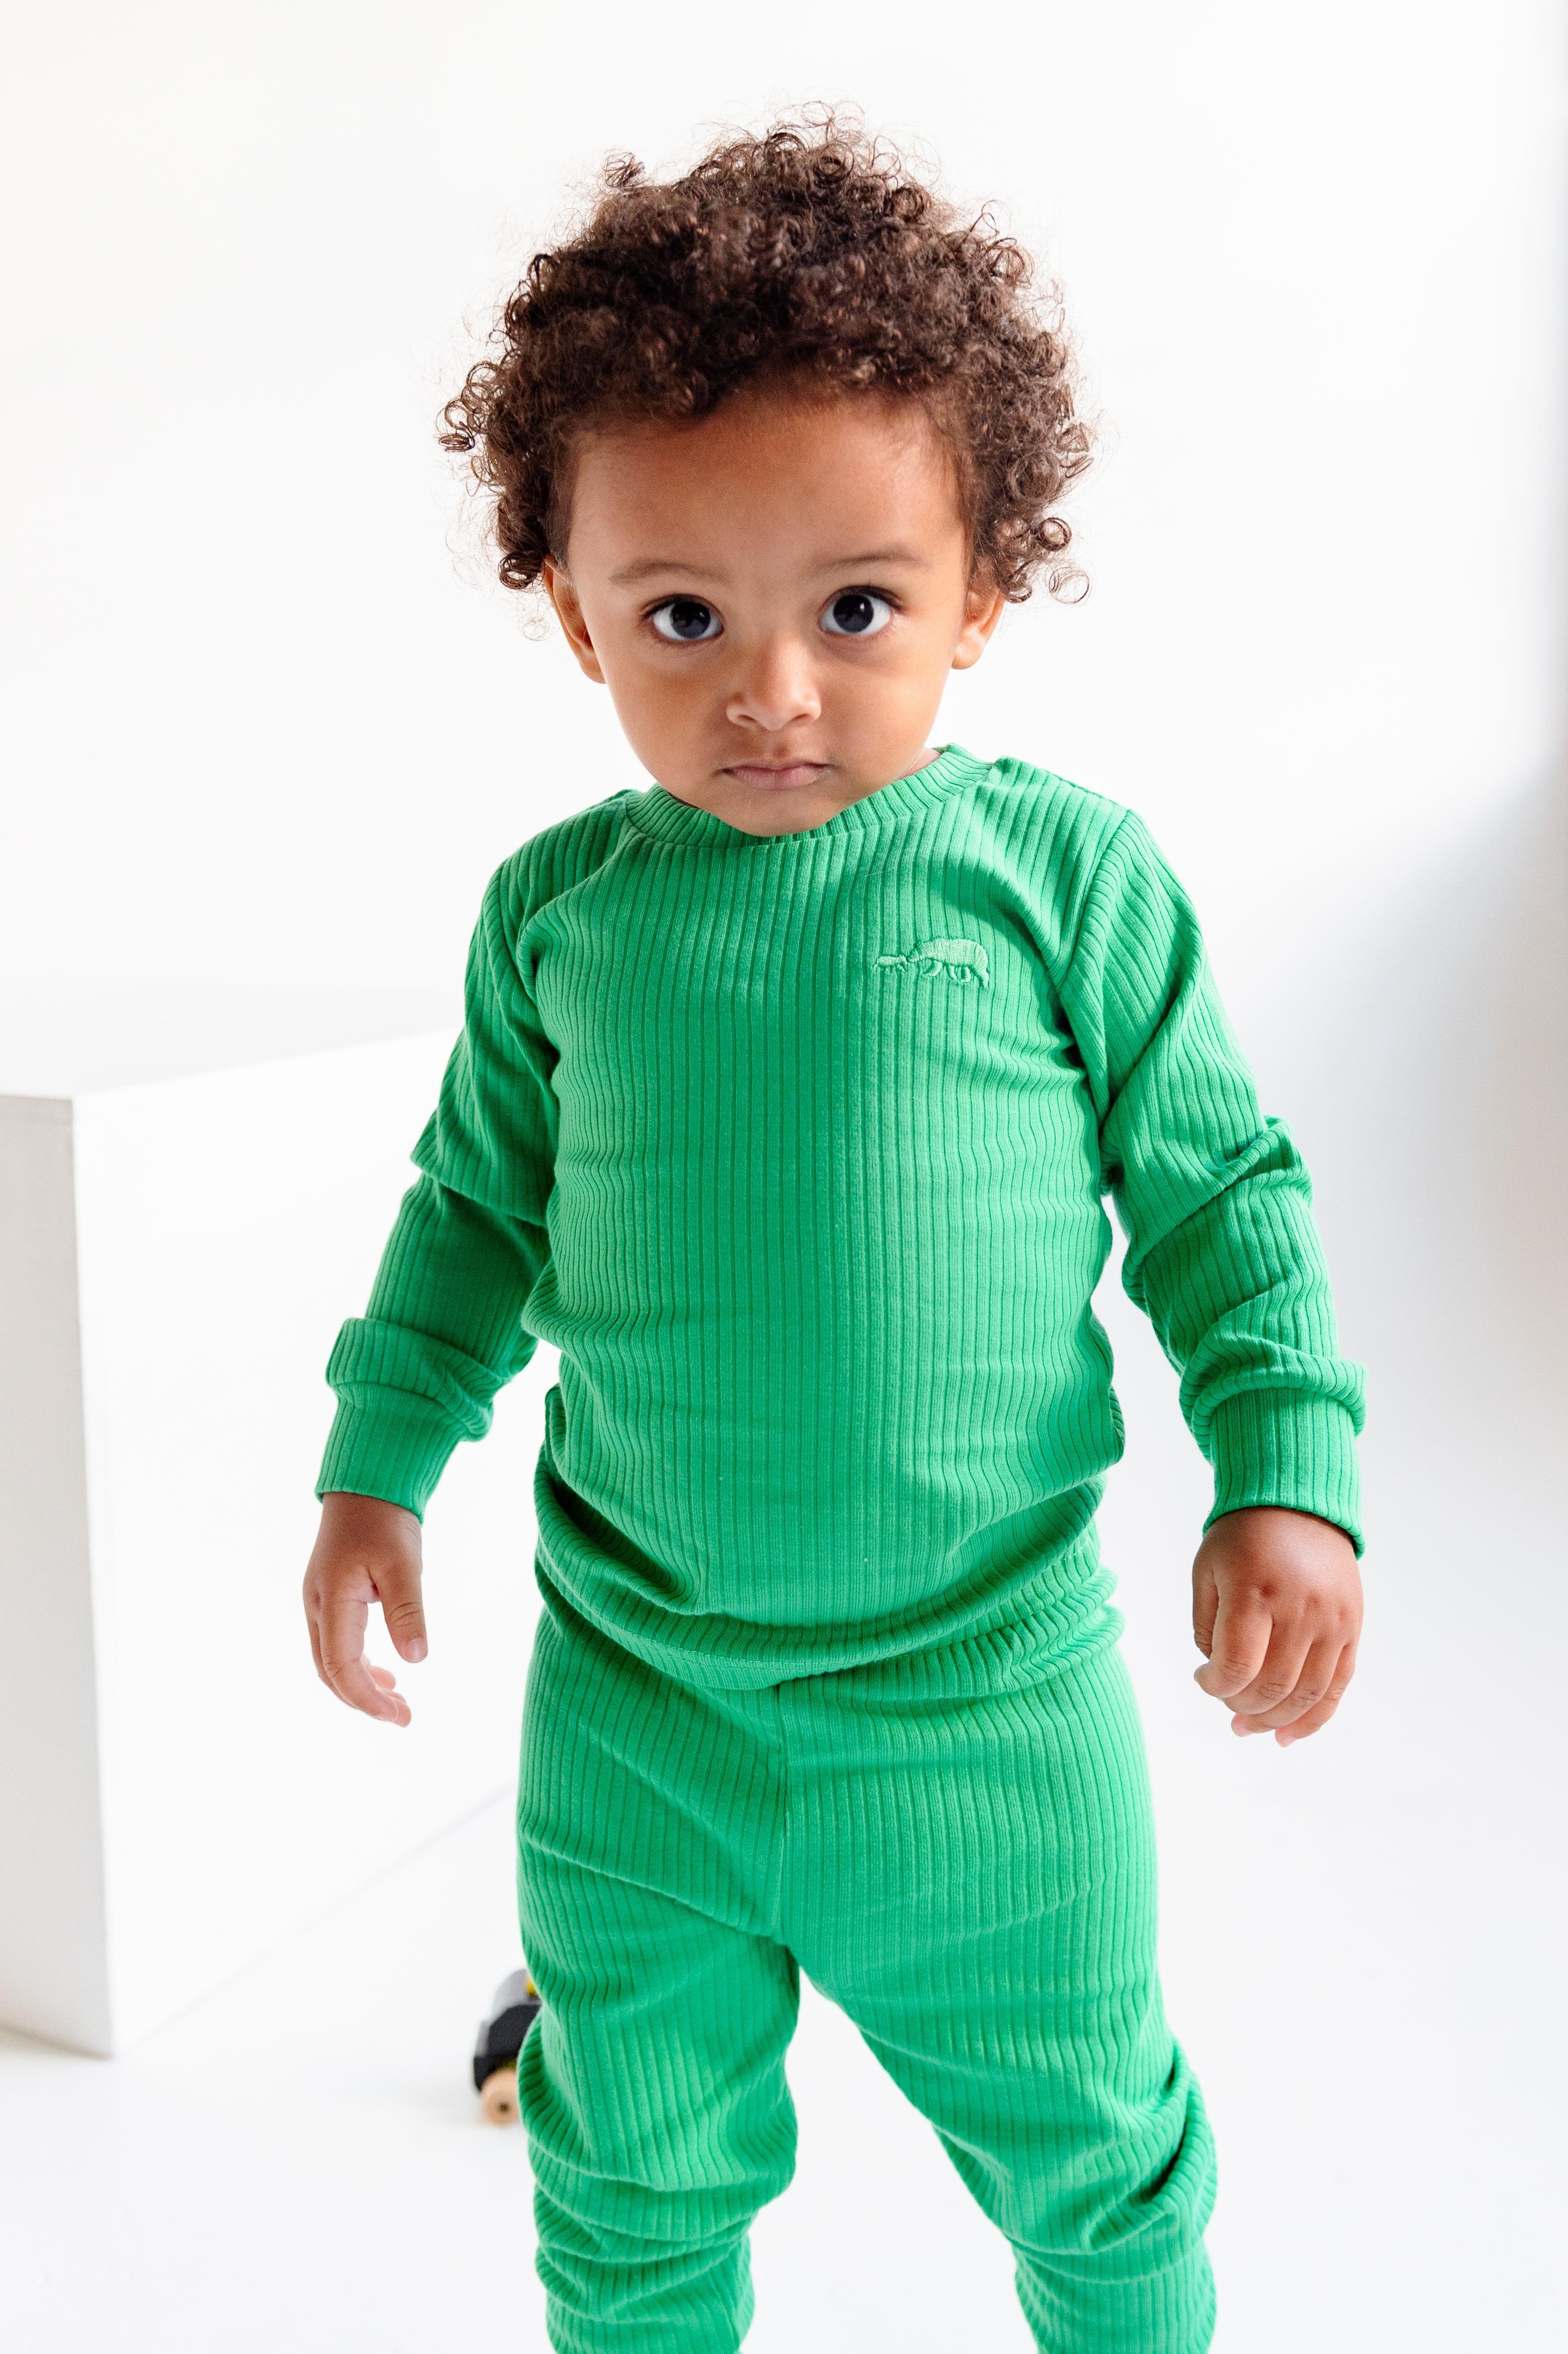 files/grass-green-ribbed-long-sleeve-top-claybearofficial-1.jpg